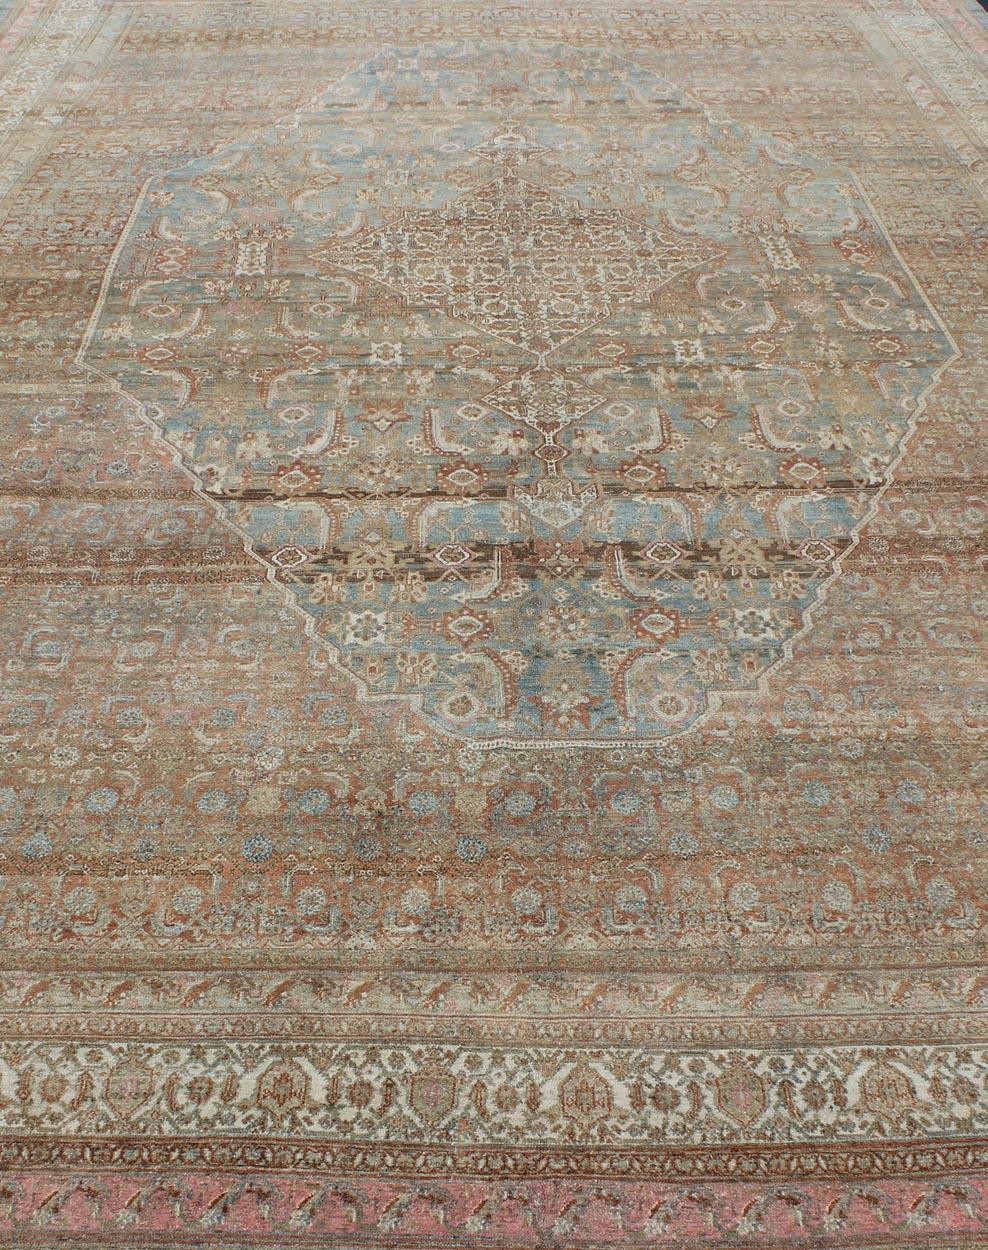 Early 20th Century Large Antique Persian Bibikabad Rug in Light Blue Background  For Sale 3